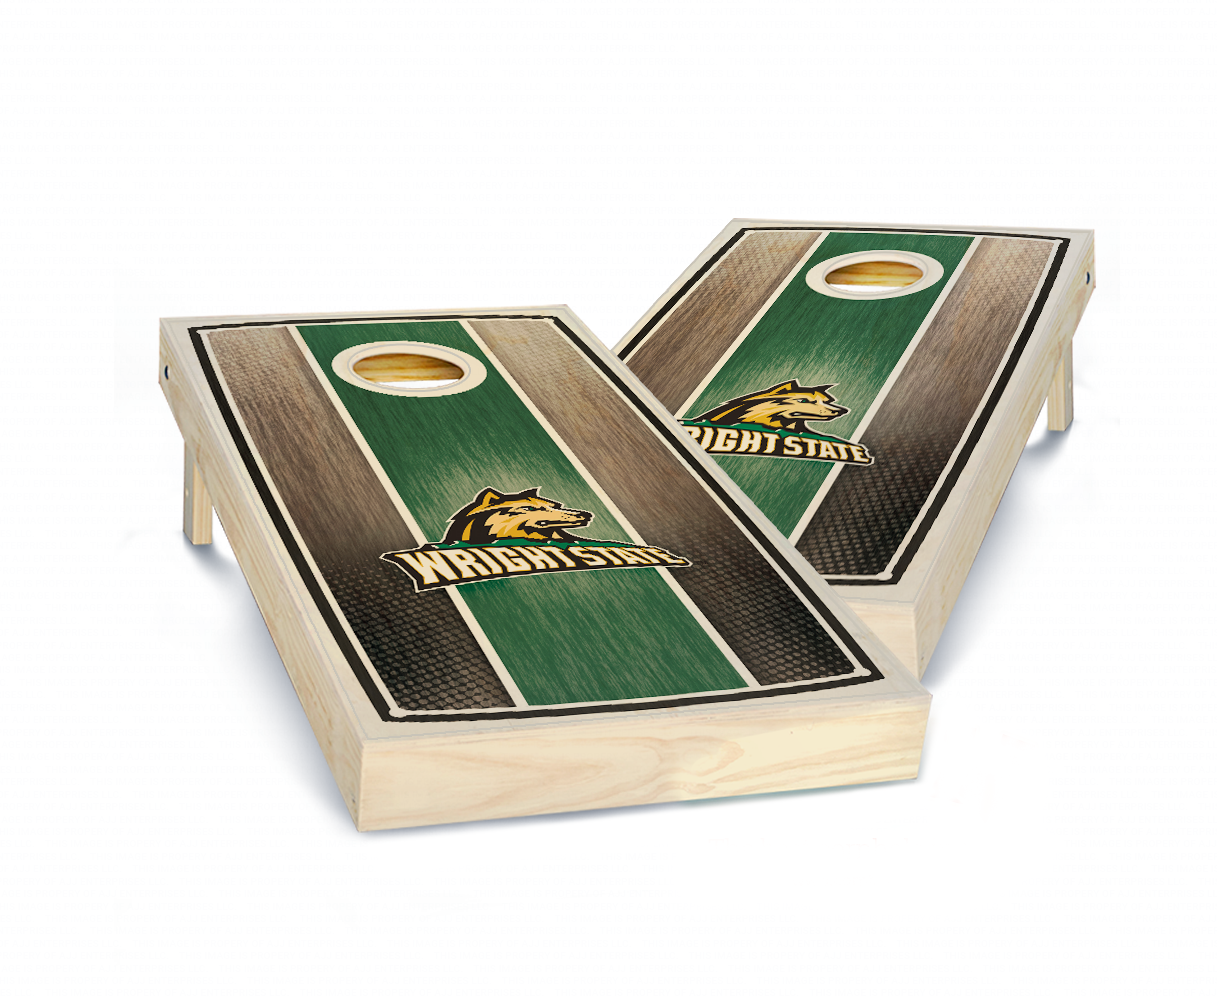 "Wright State Stained Stripe" Cornhole Boards